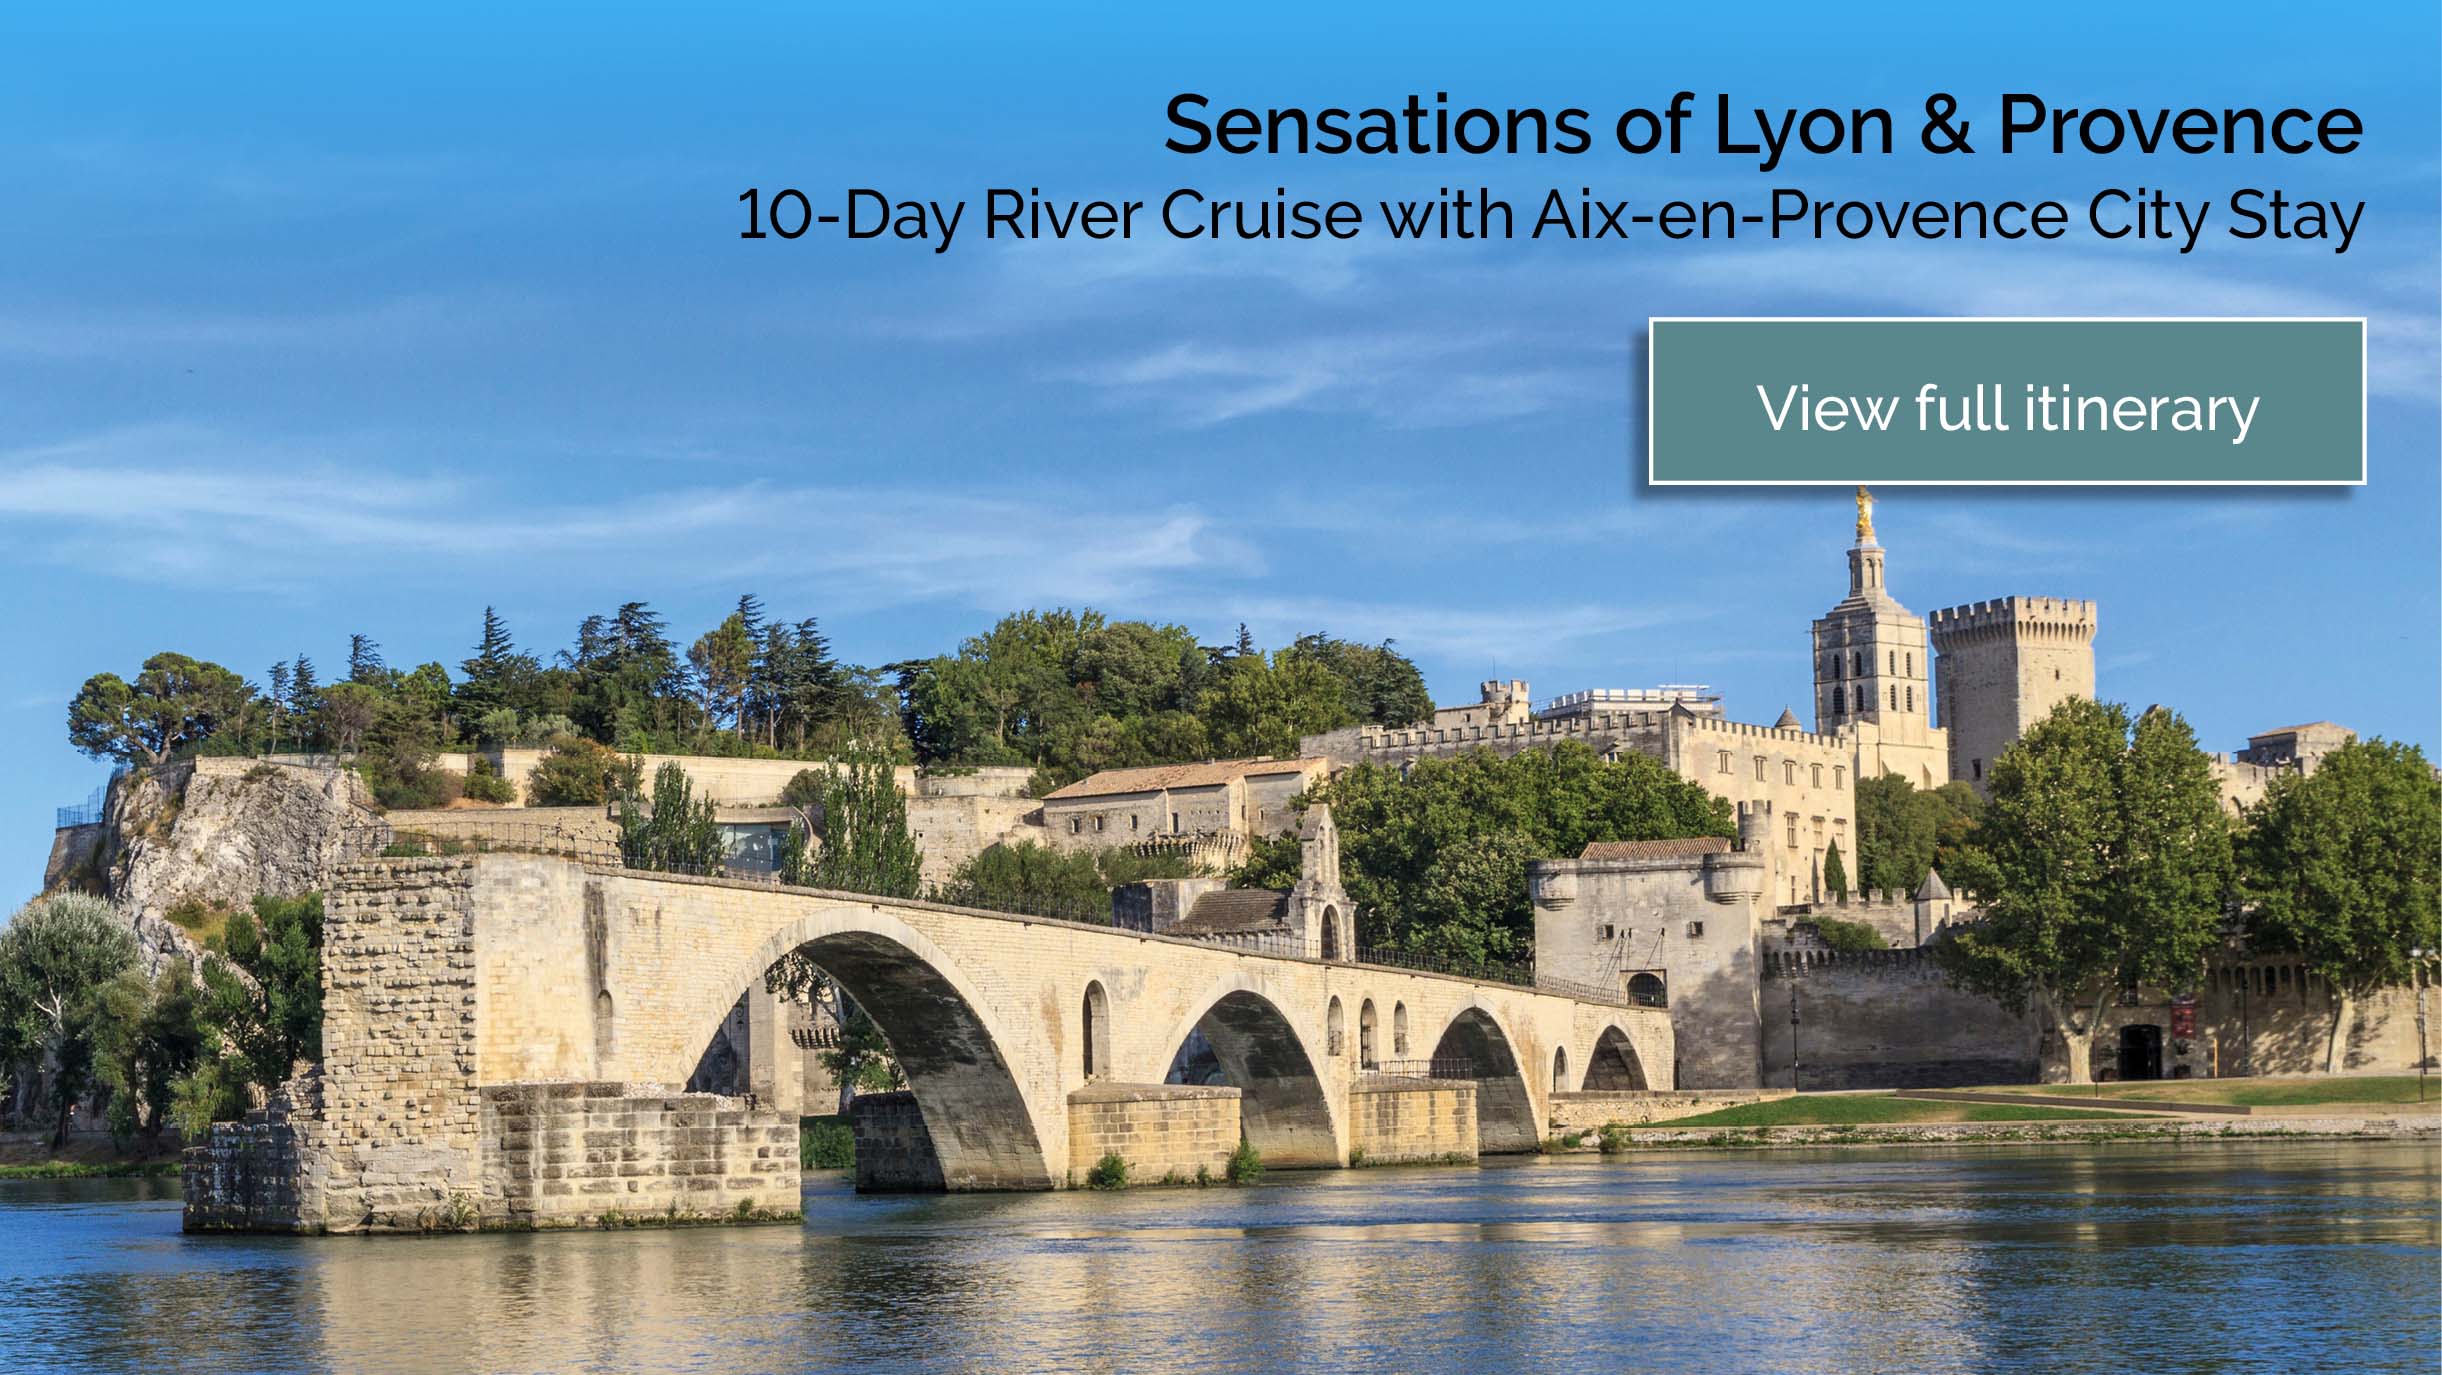 view the full Sensations of Lyon & Provence 10-Day River Cruise with Aix-en-Provence City Stay itinerary here